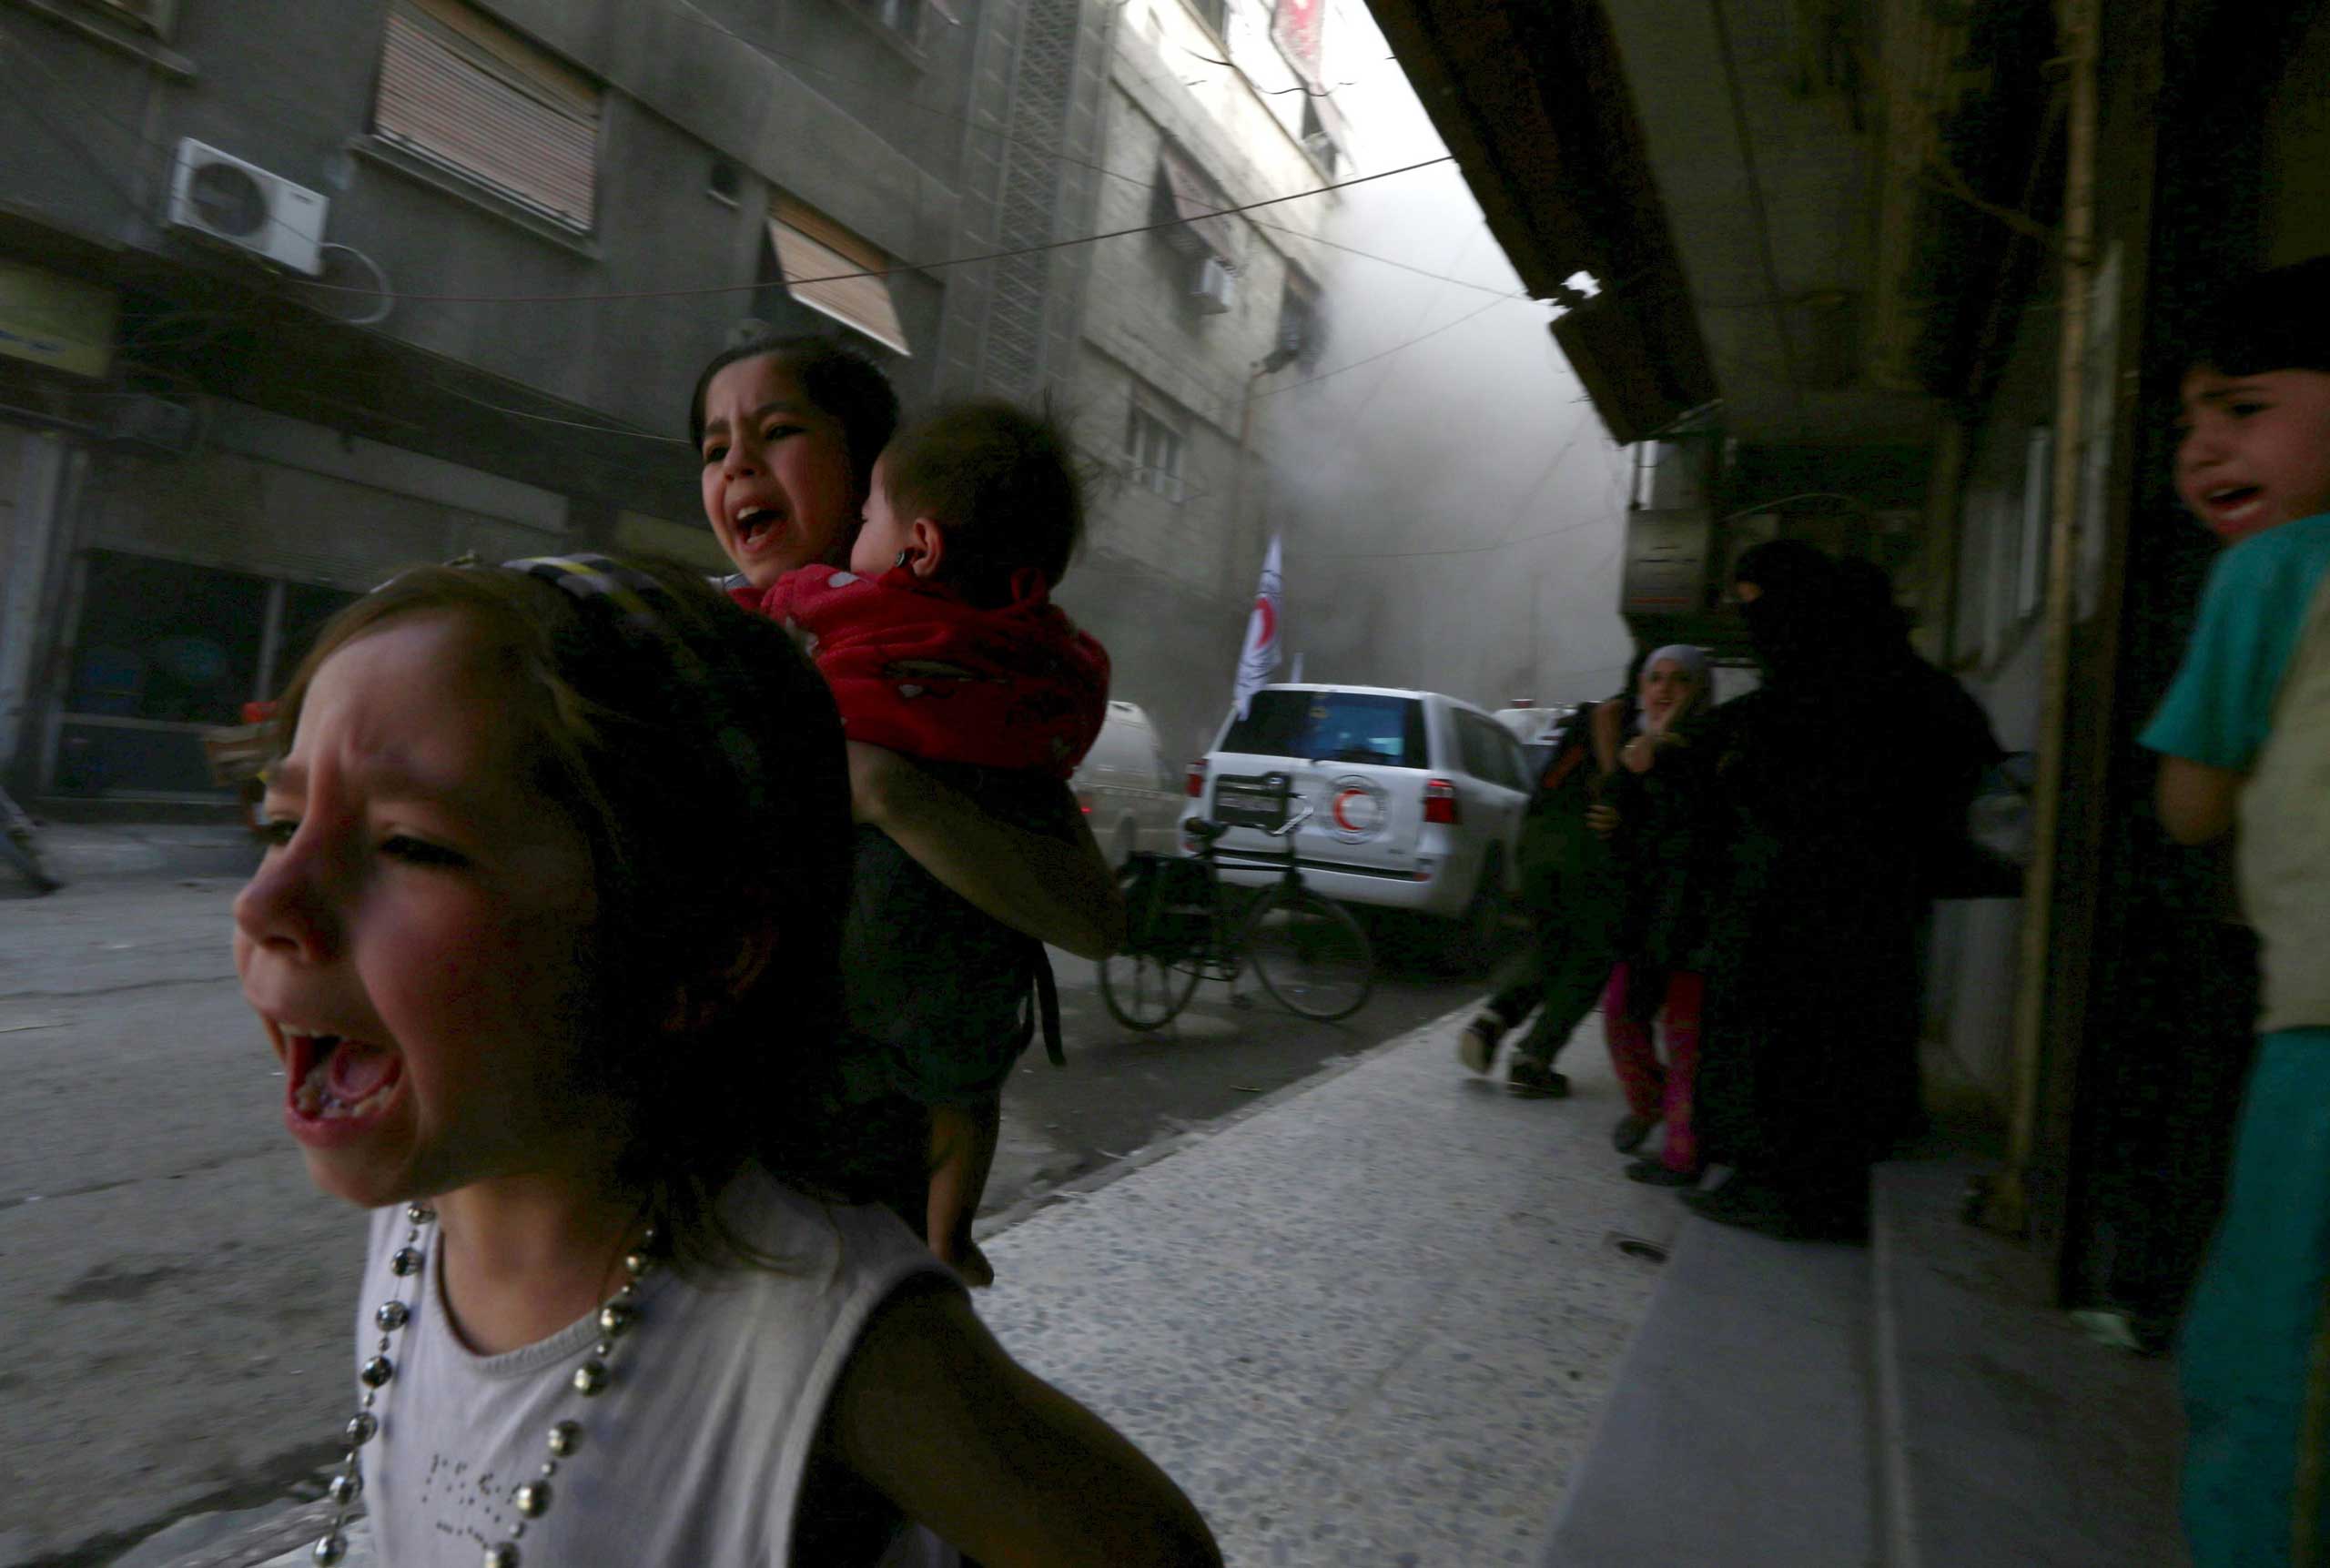 Children react after what activists said was shelling by forces loyal to Syria's President Bashar al-Assad near the Syrian Arab Red Crescent center in the Douma neighborhood of Damascus on May 6, 2015. (Bassam Khabieh—Reuters)